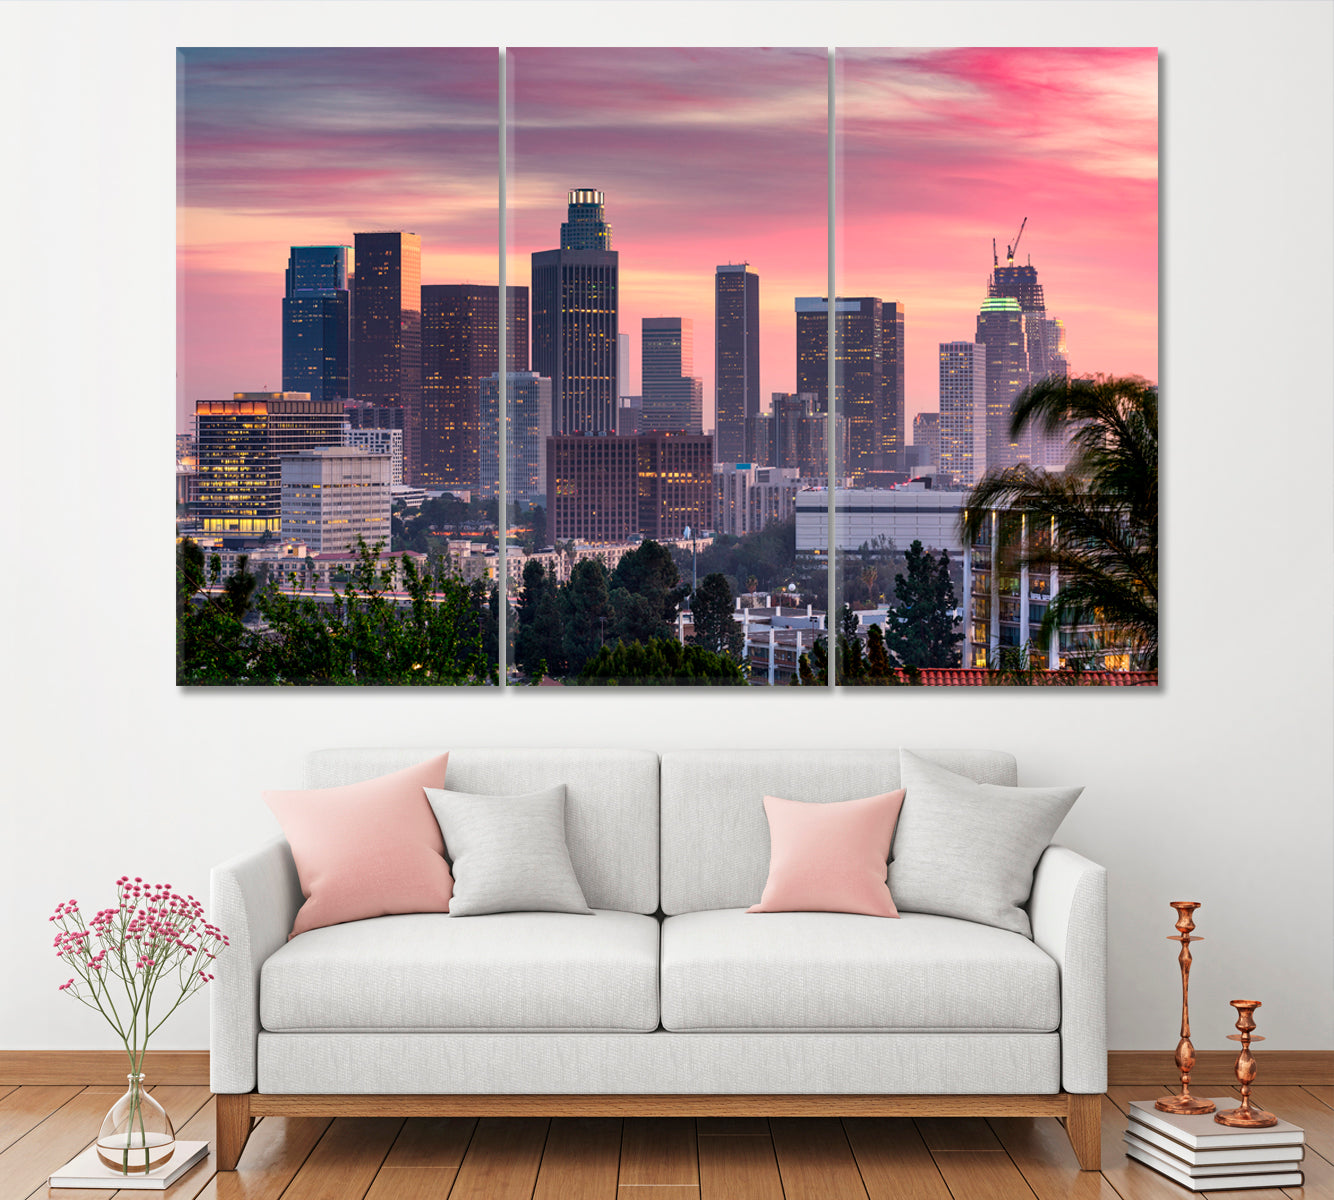 Los Angeles California Canvas Print ArtLexy 3 Panels 36"x24" inches 